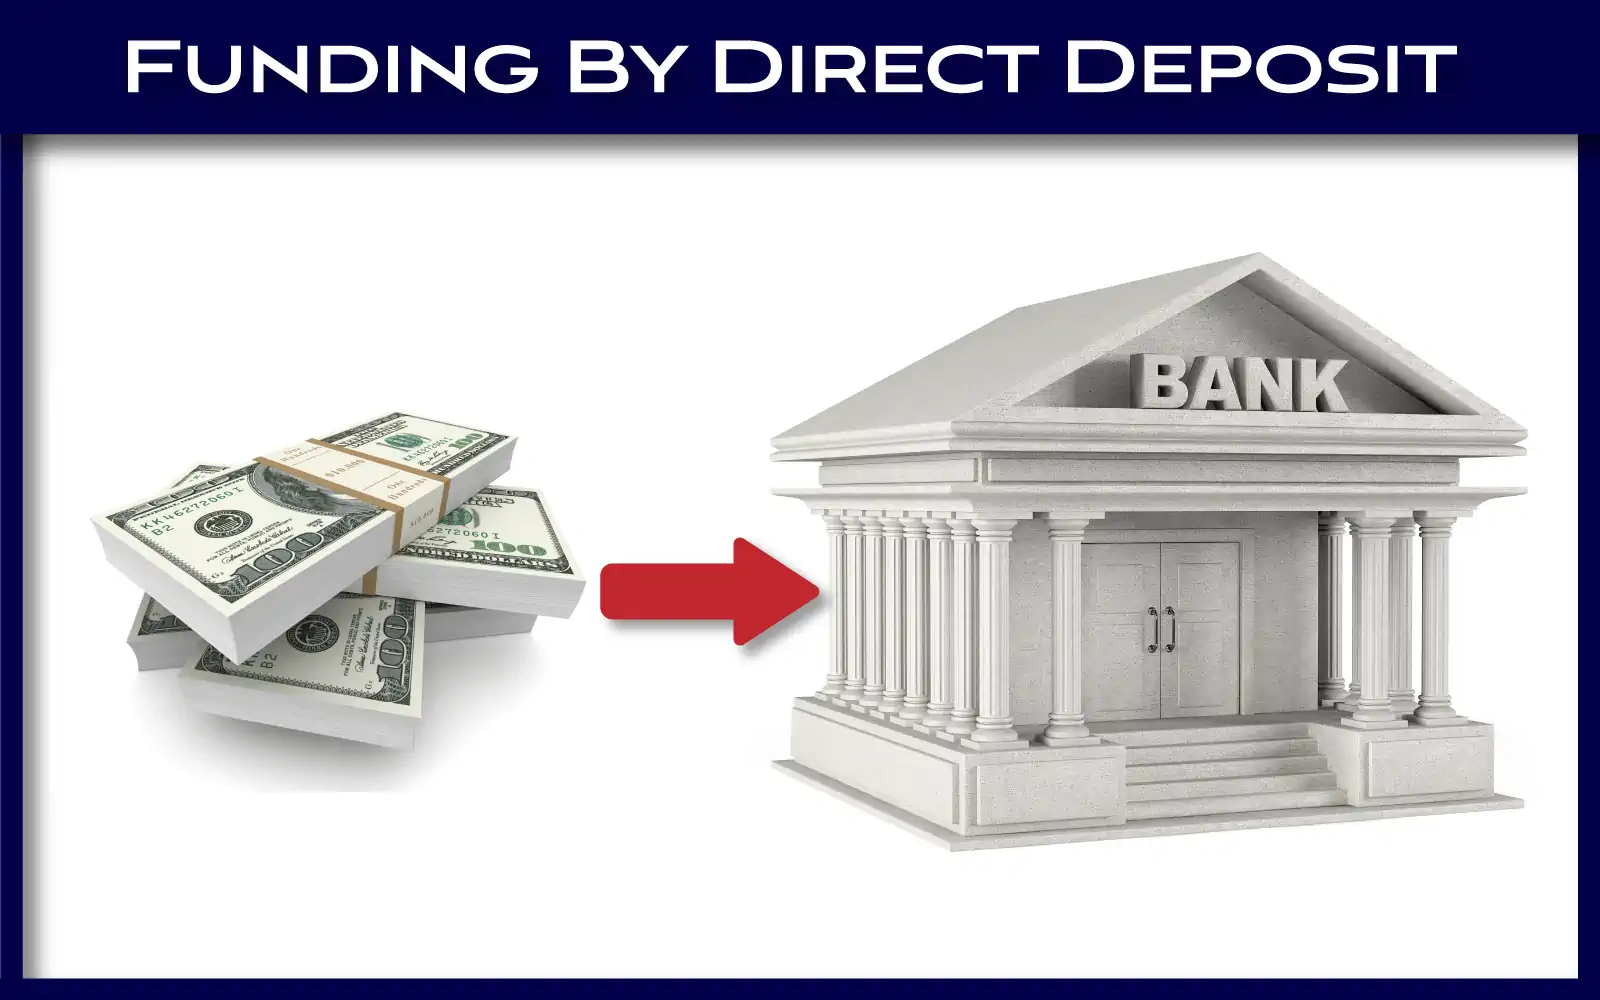 Cash direct deposited into a bank